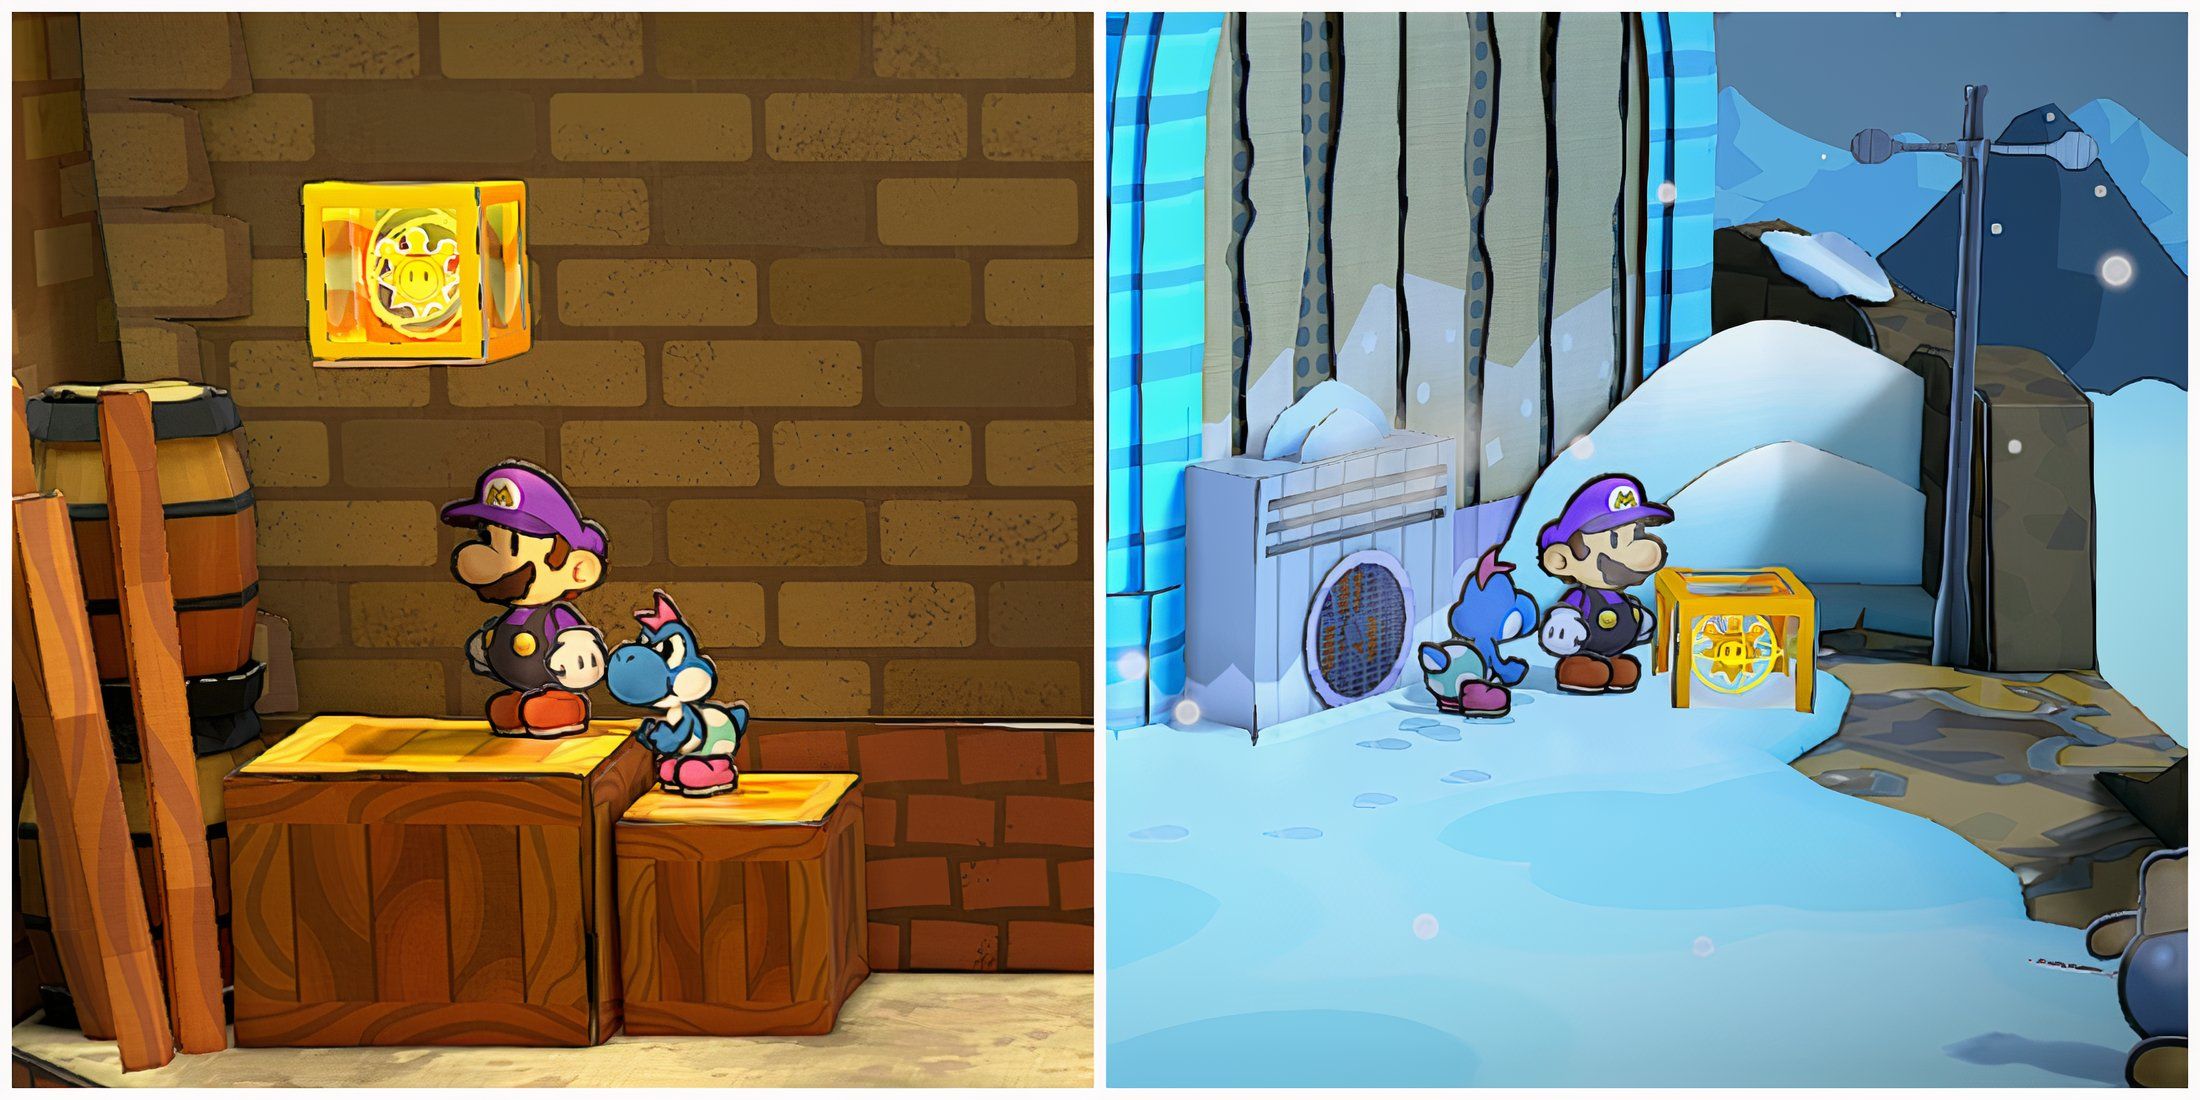 Split image of a shine sprite in Rogueport and a shine sprite in the Fahr Outpost in Paper Mario TTYD